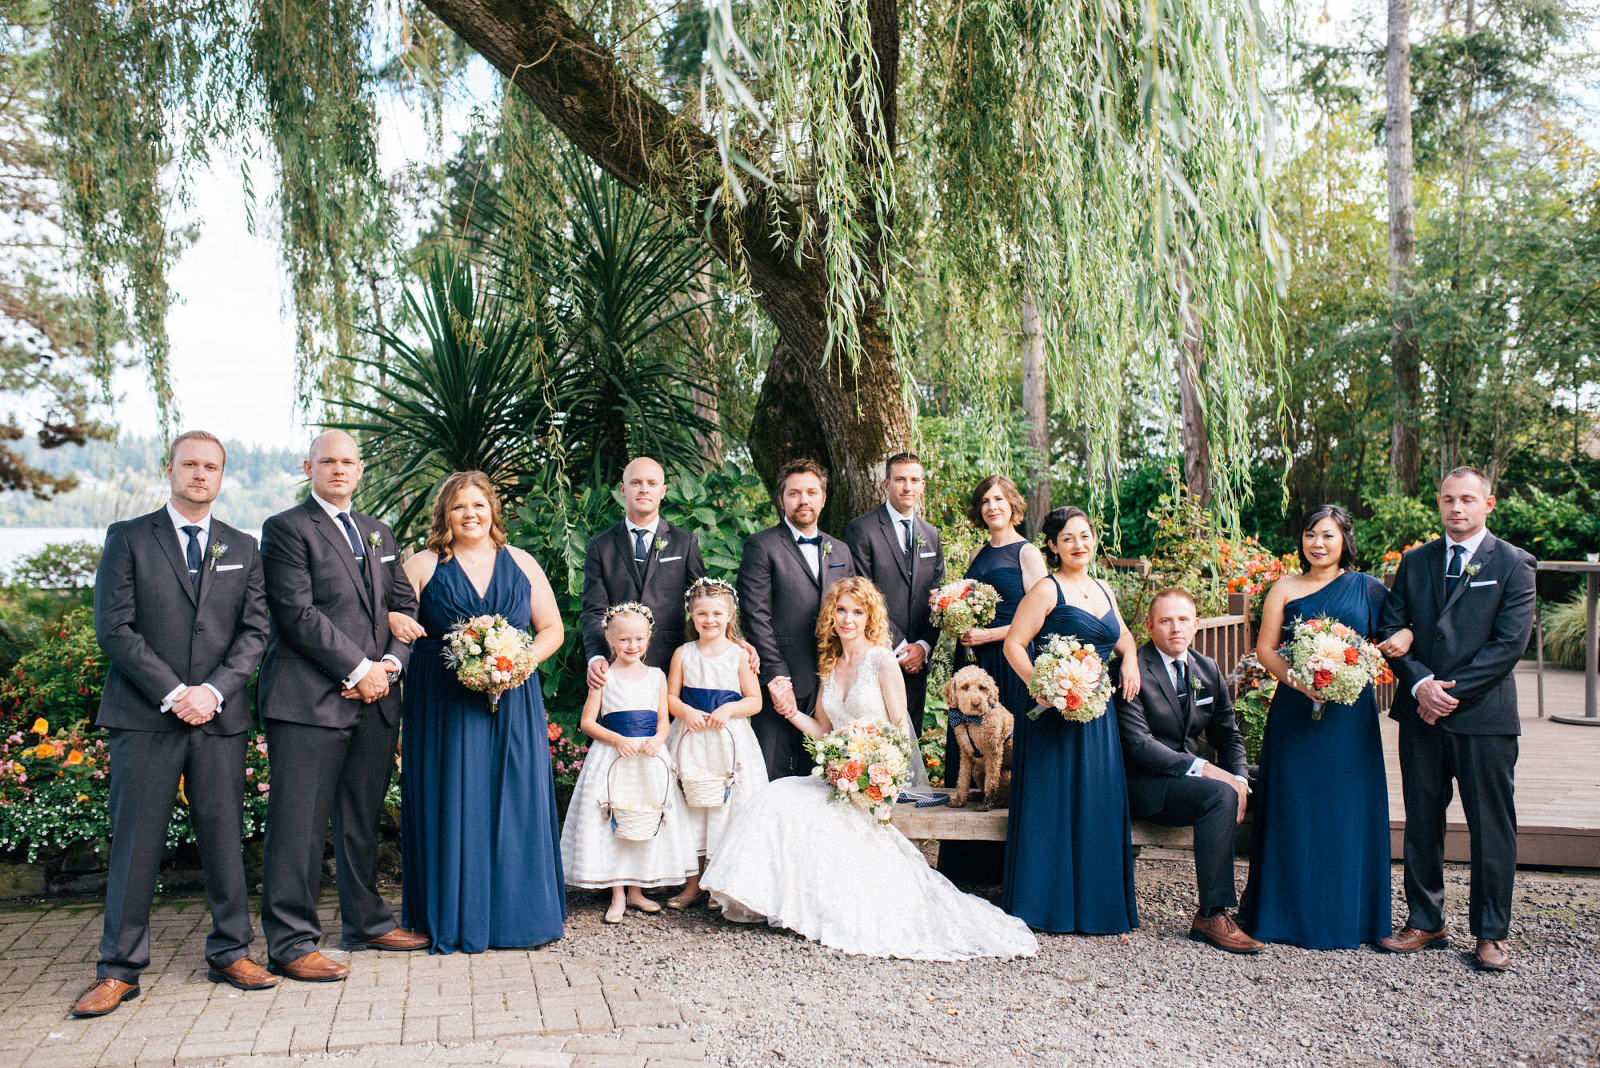 Anna and Kevin with their wedding party at Kiana Lodge, a wedding venue in Poulsbo, WA, summer 2016 (photo by Seattle Wedding Photographers Jennifer Tai Photo Artistry)